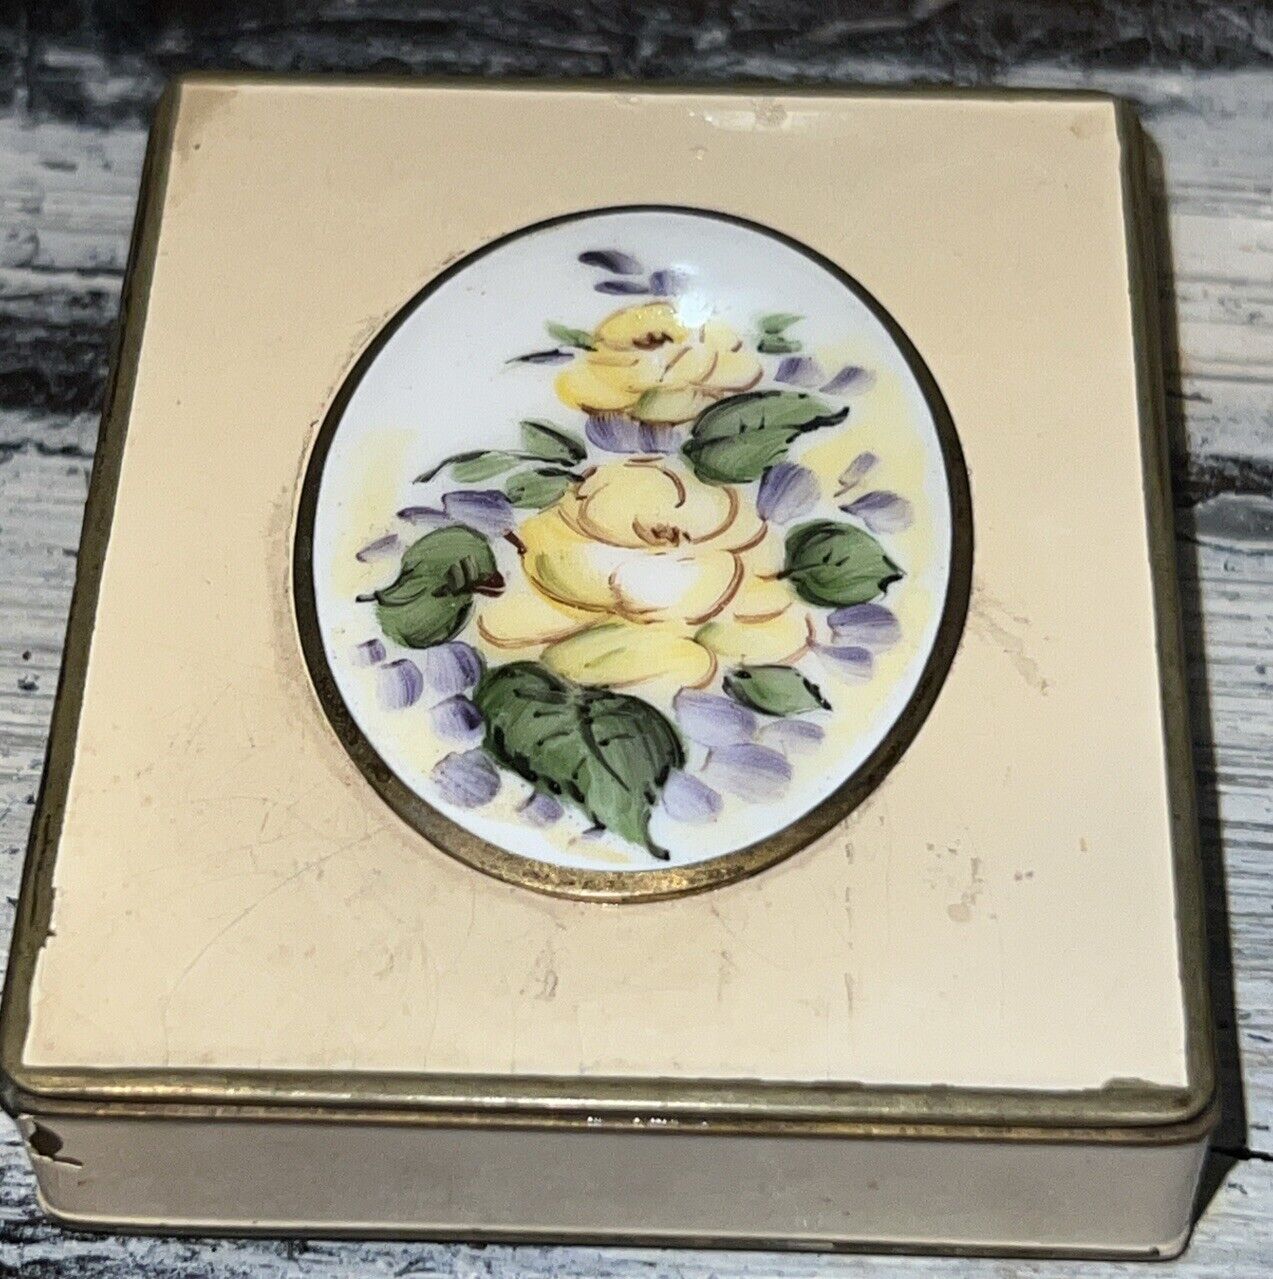 Vintage 1930s Gilloche Enamel Floral Bliss Brothers Powder compact mirror